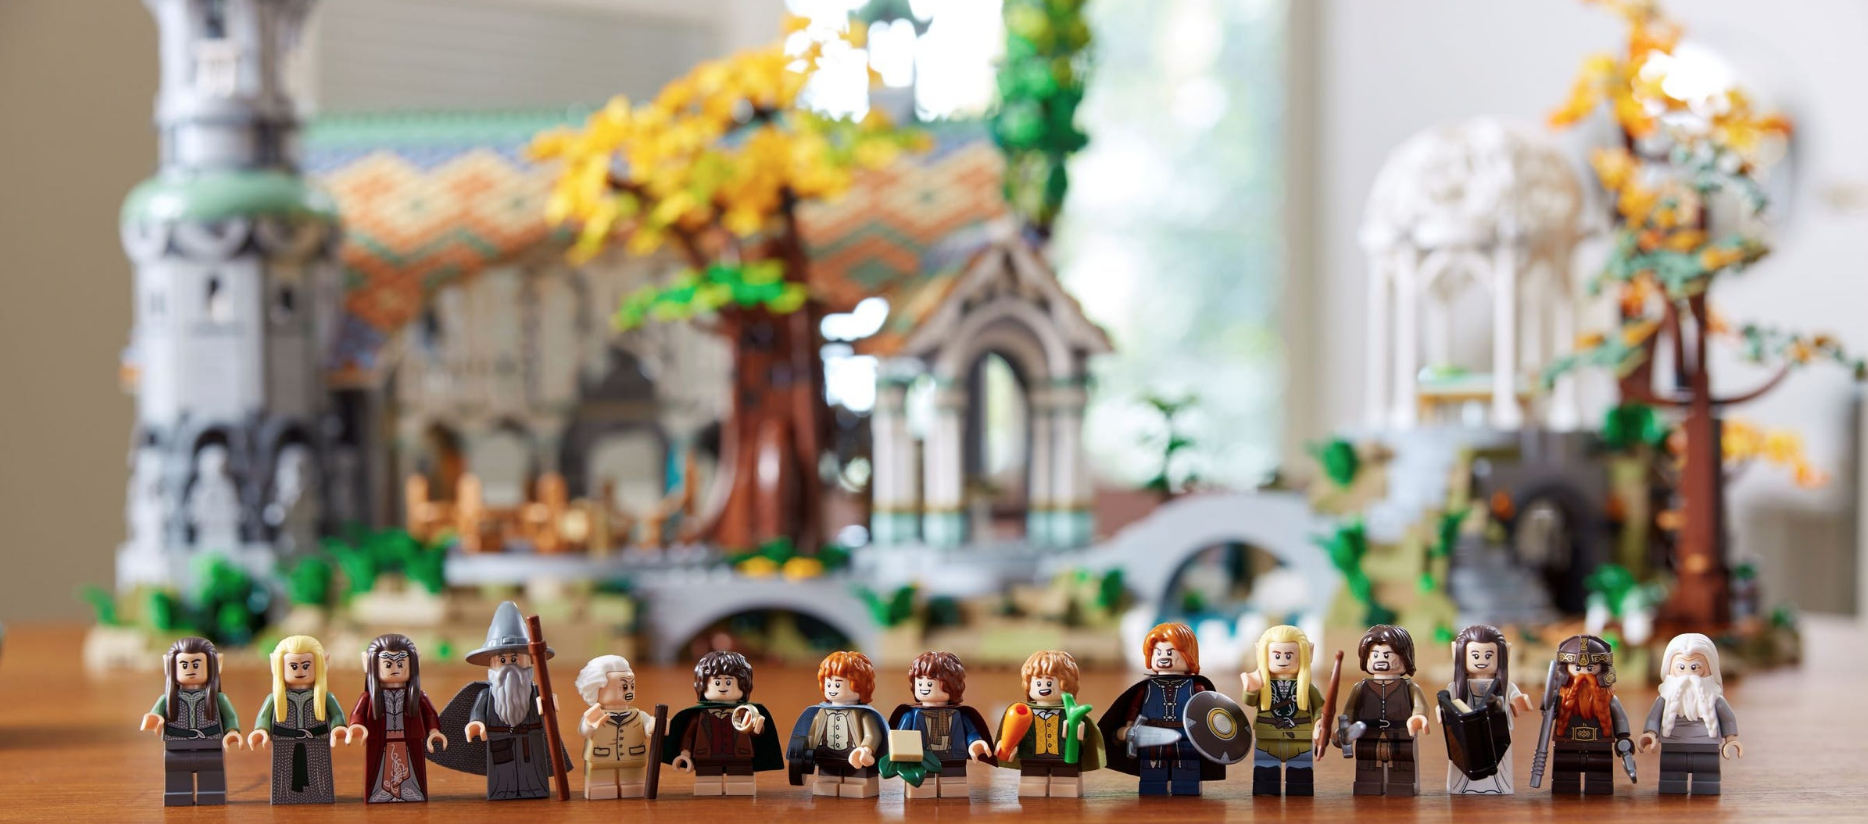 The LEGO Rivendell minifigures